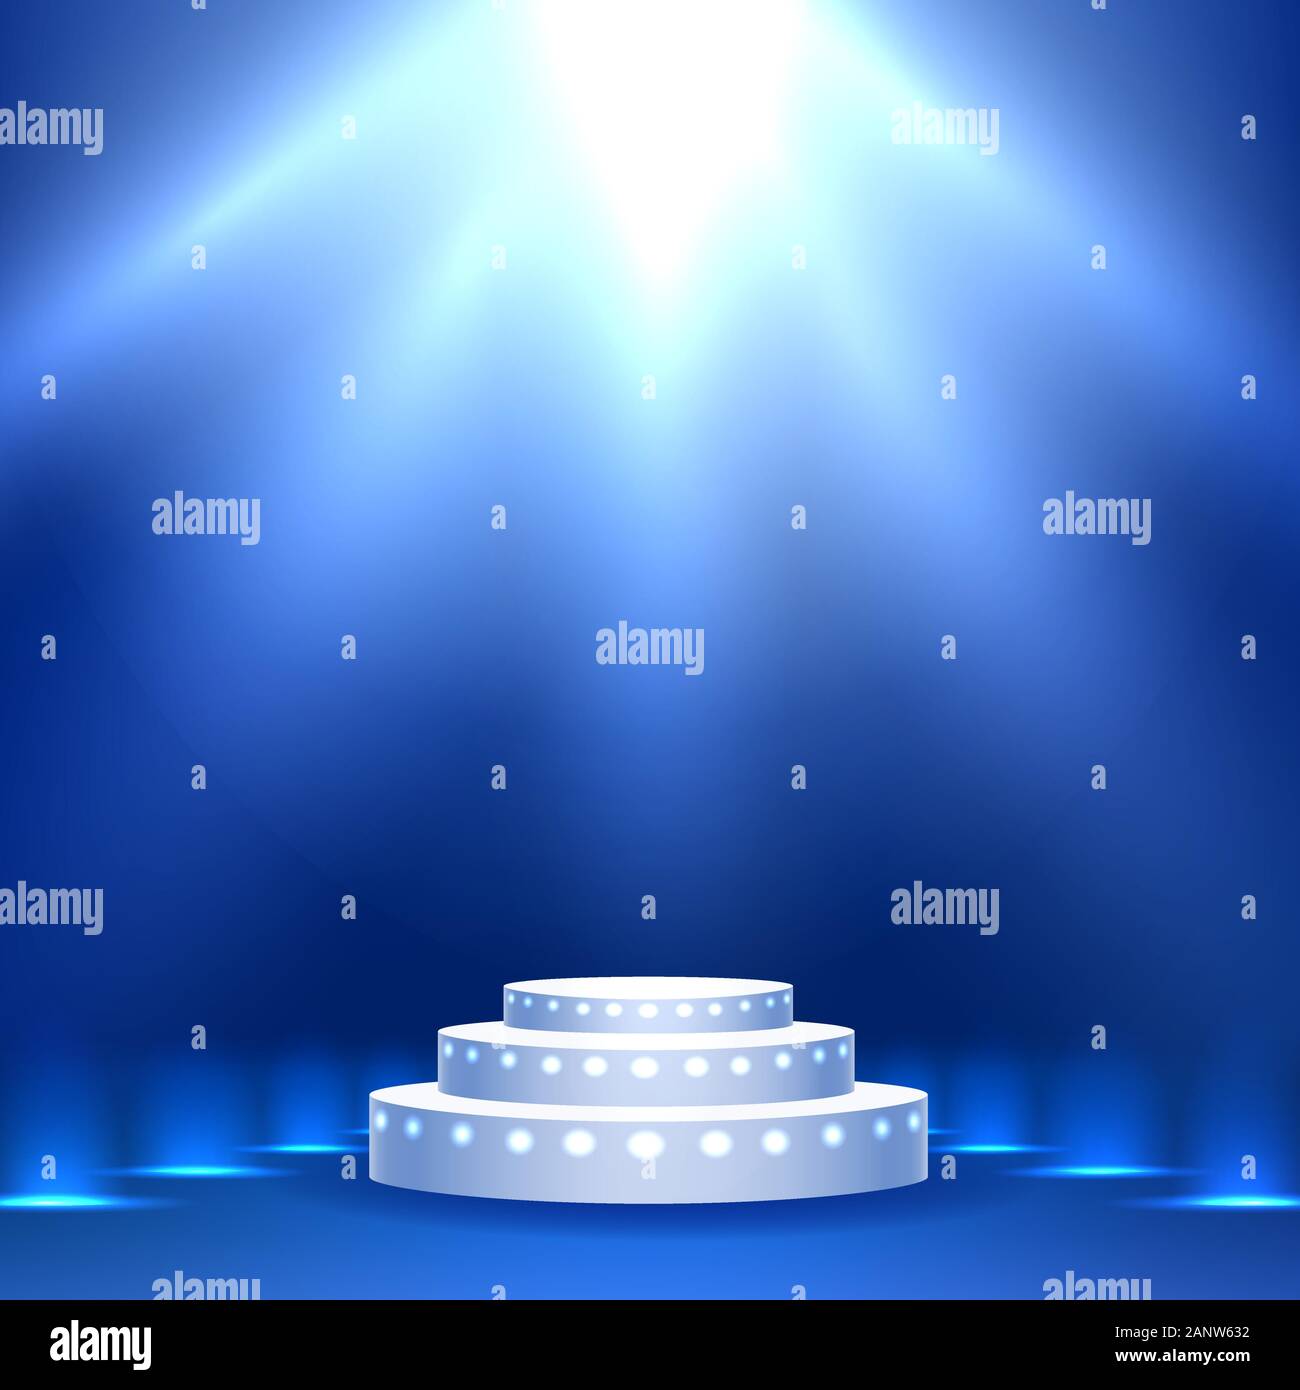 Festive Stage Podium With Lamps On Blue Background. Vector Illustration. Stock Vector